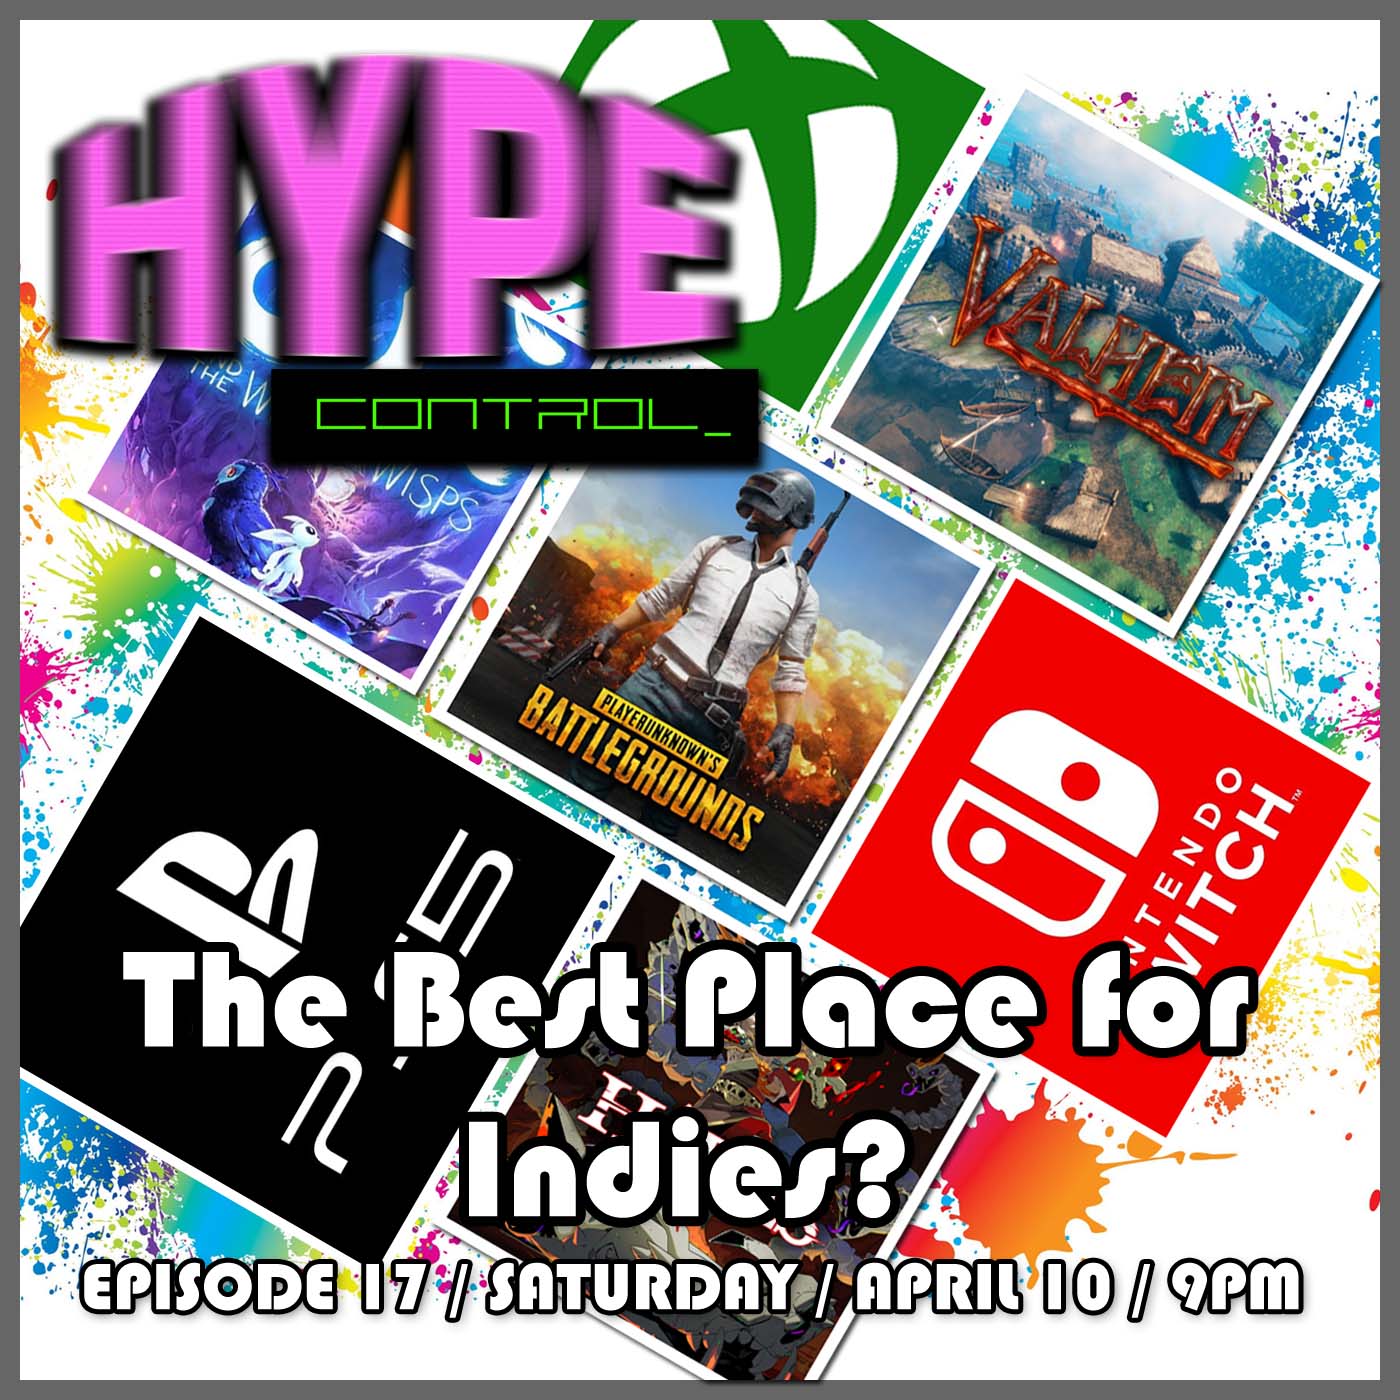 Ep. 17 - The Best Place for Indies?